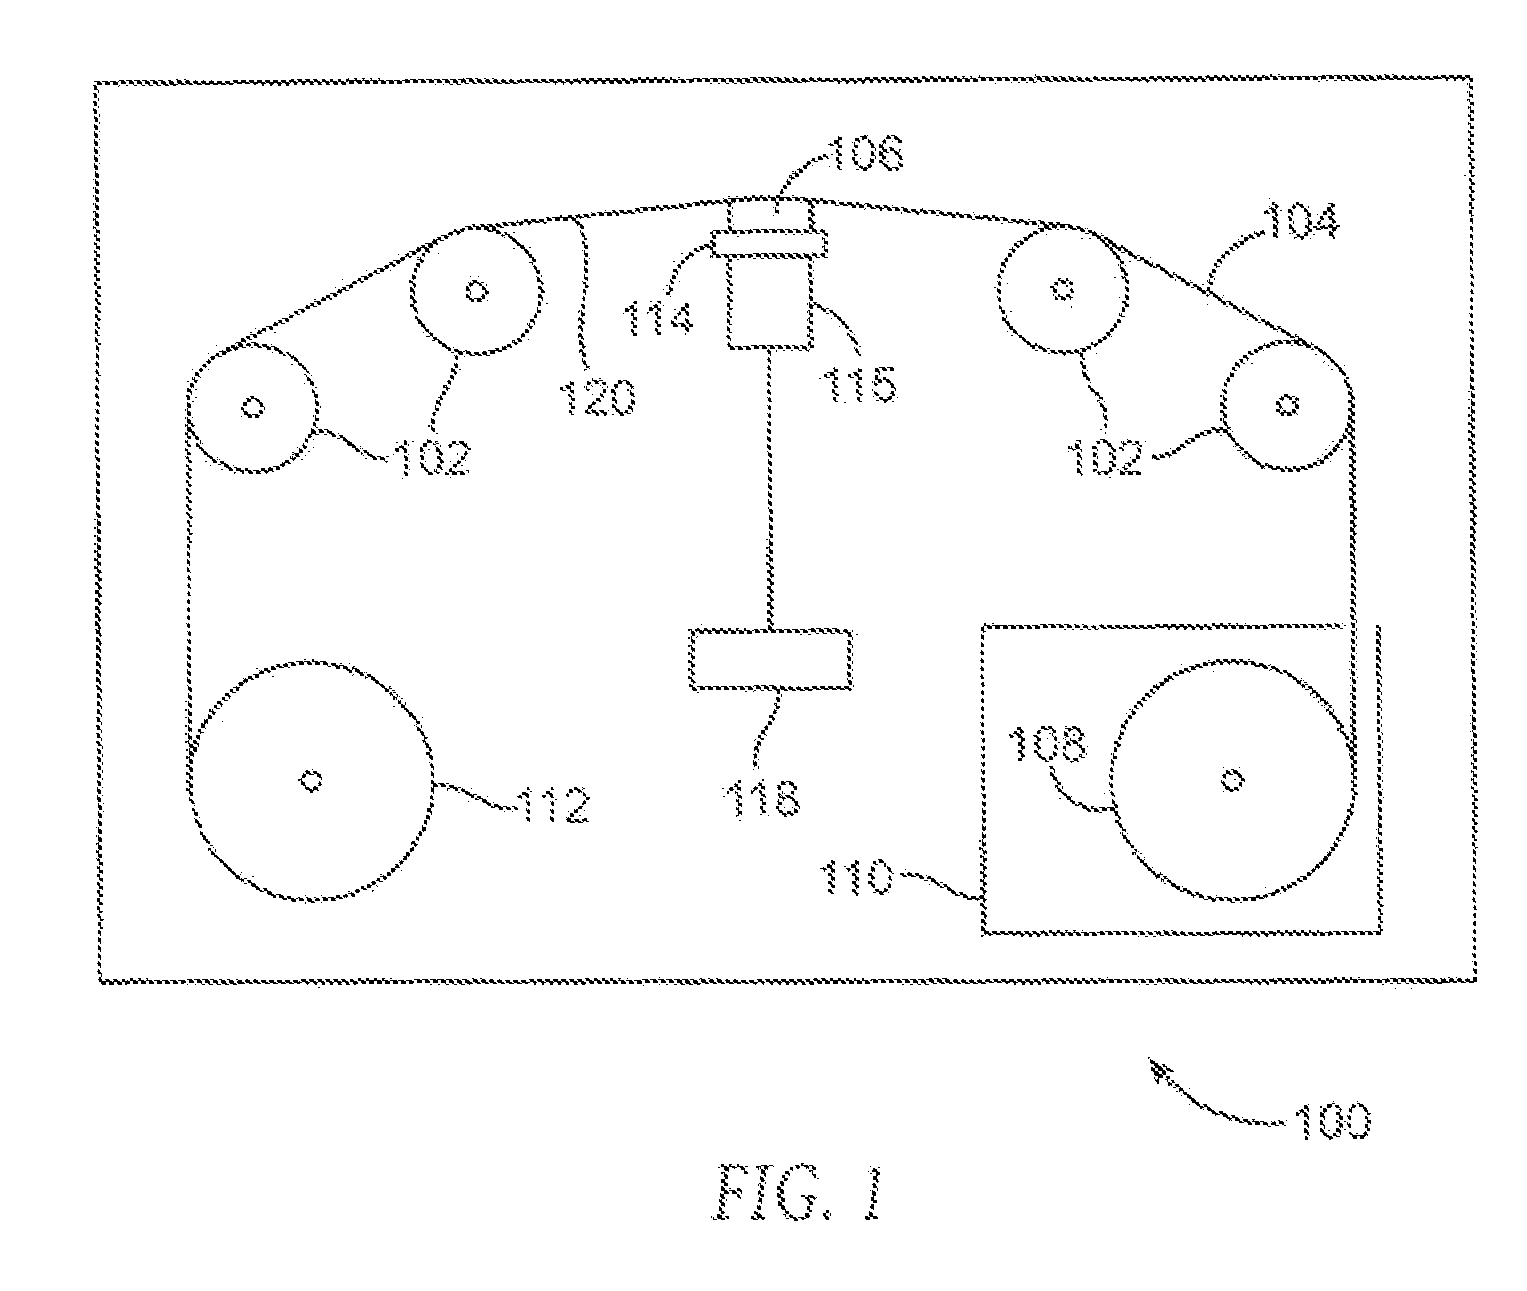 Tape system with an isolated load/unload tape path